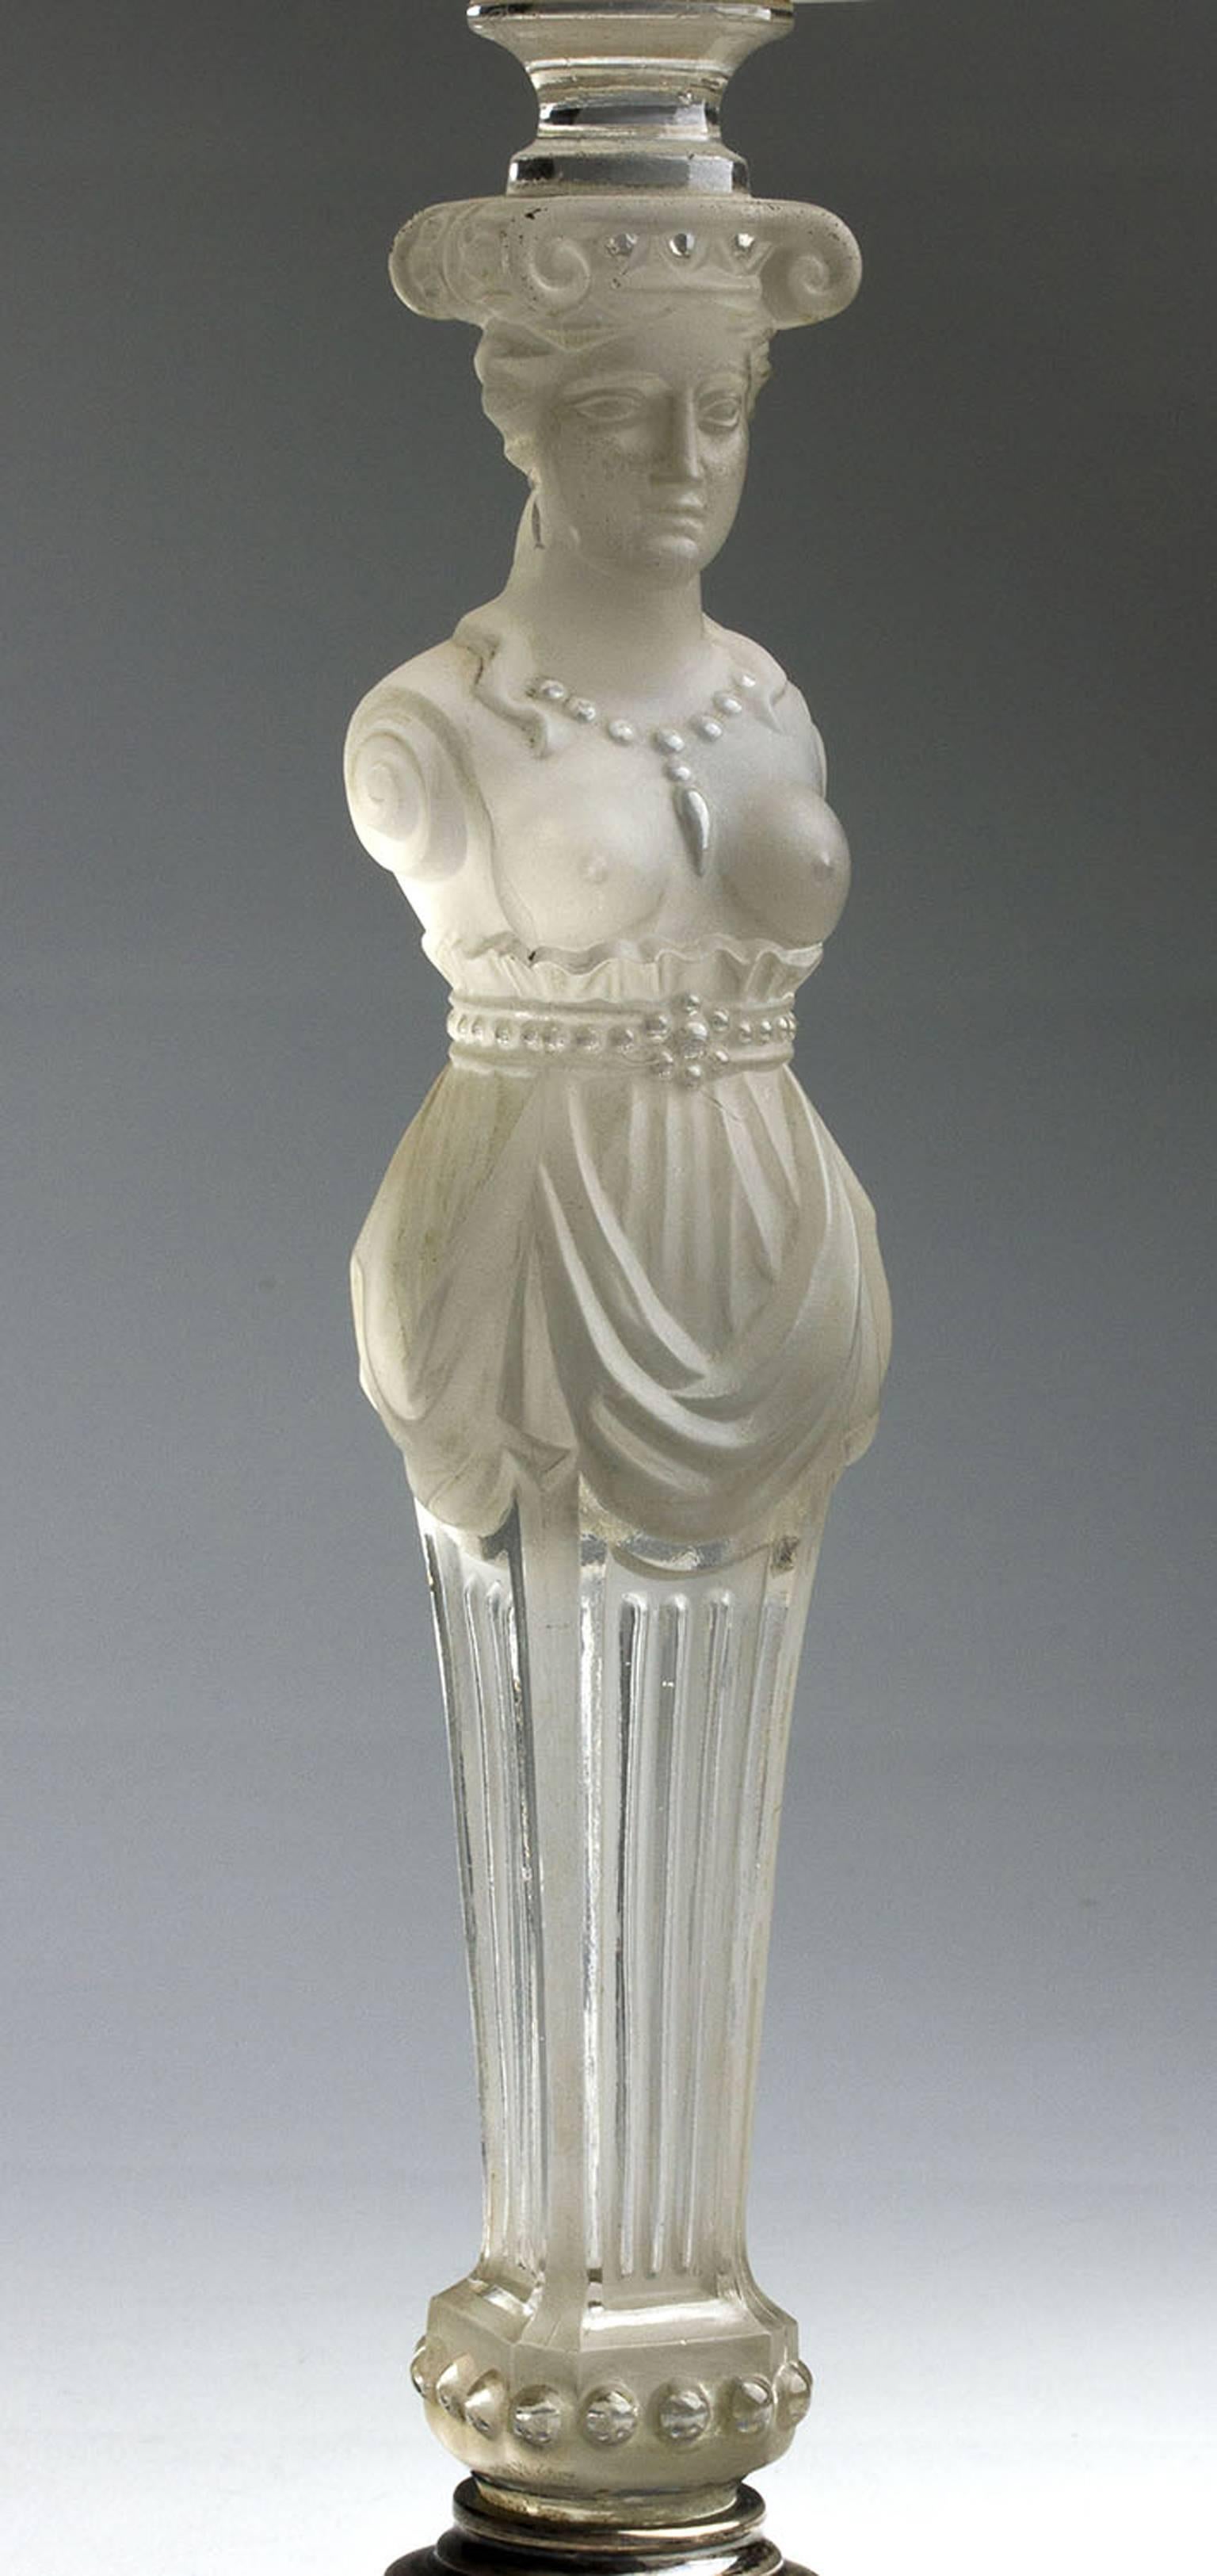 A Baccarat etched crystal and solid silver circular base figural centrepiece featuring a standing caryatid supporting a crystal bowl with a central trumpet vase. Very clear hallmarks struck to the surface of the base, Holland, 1869. Dimension: